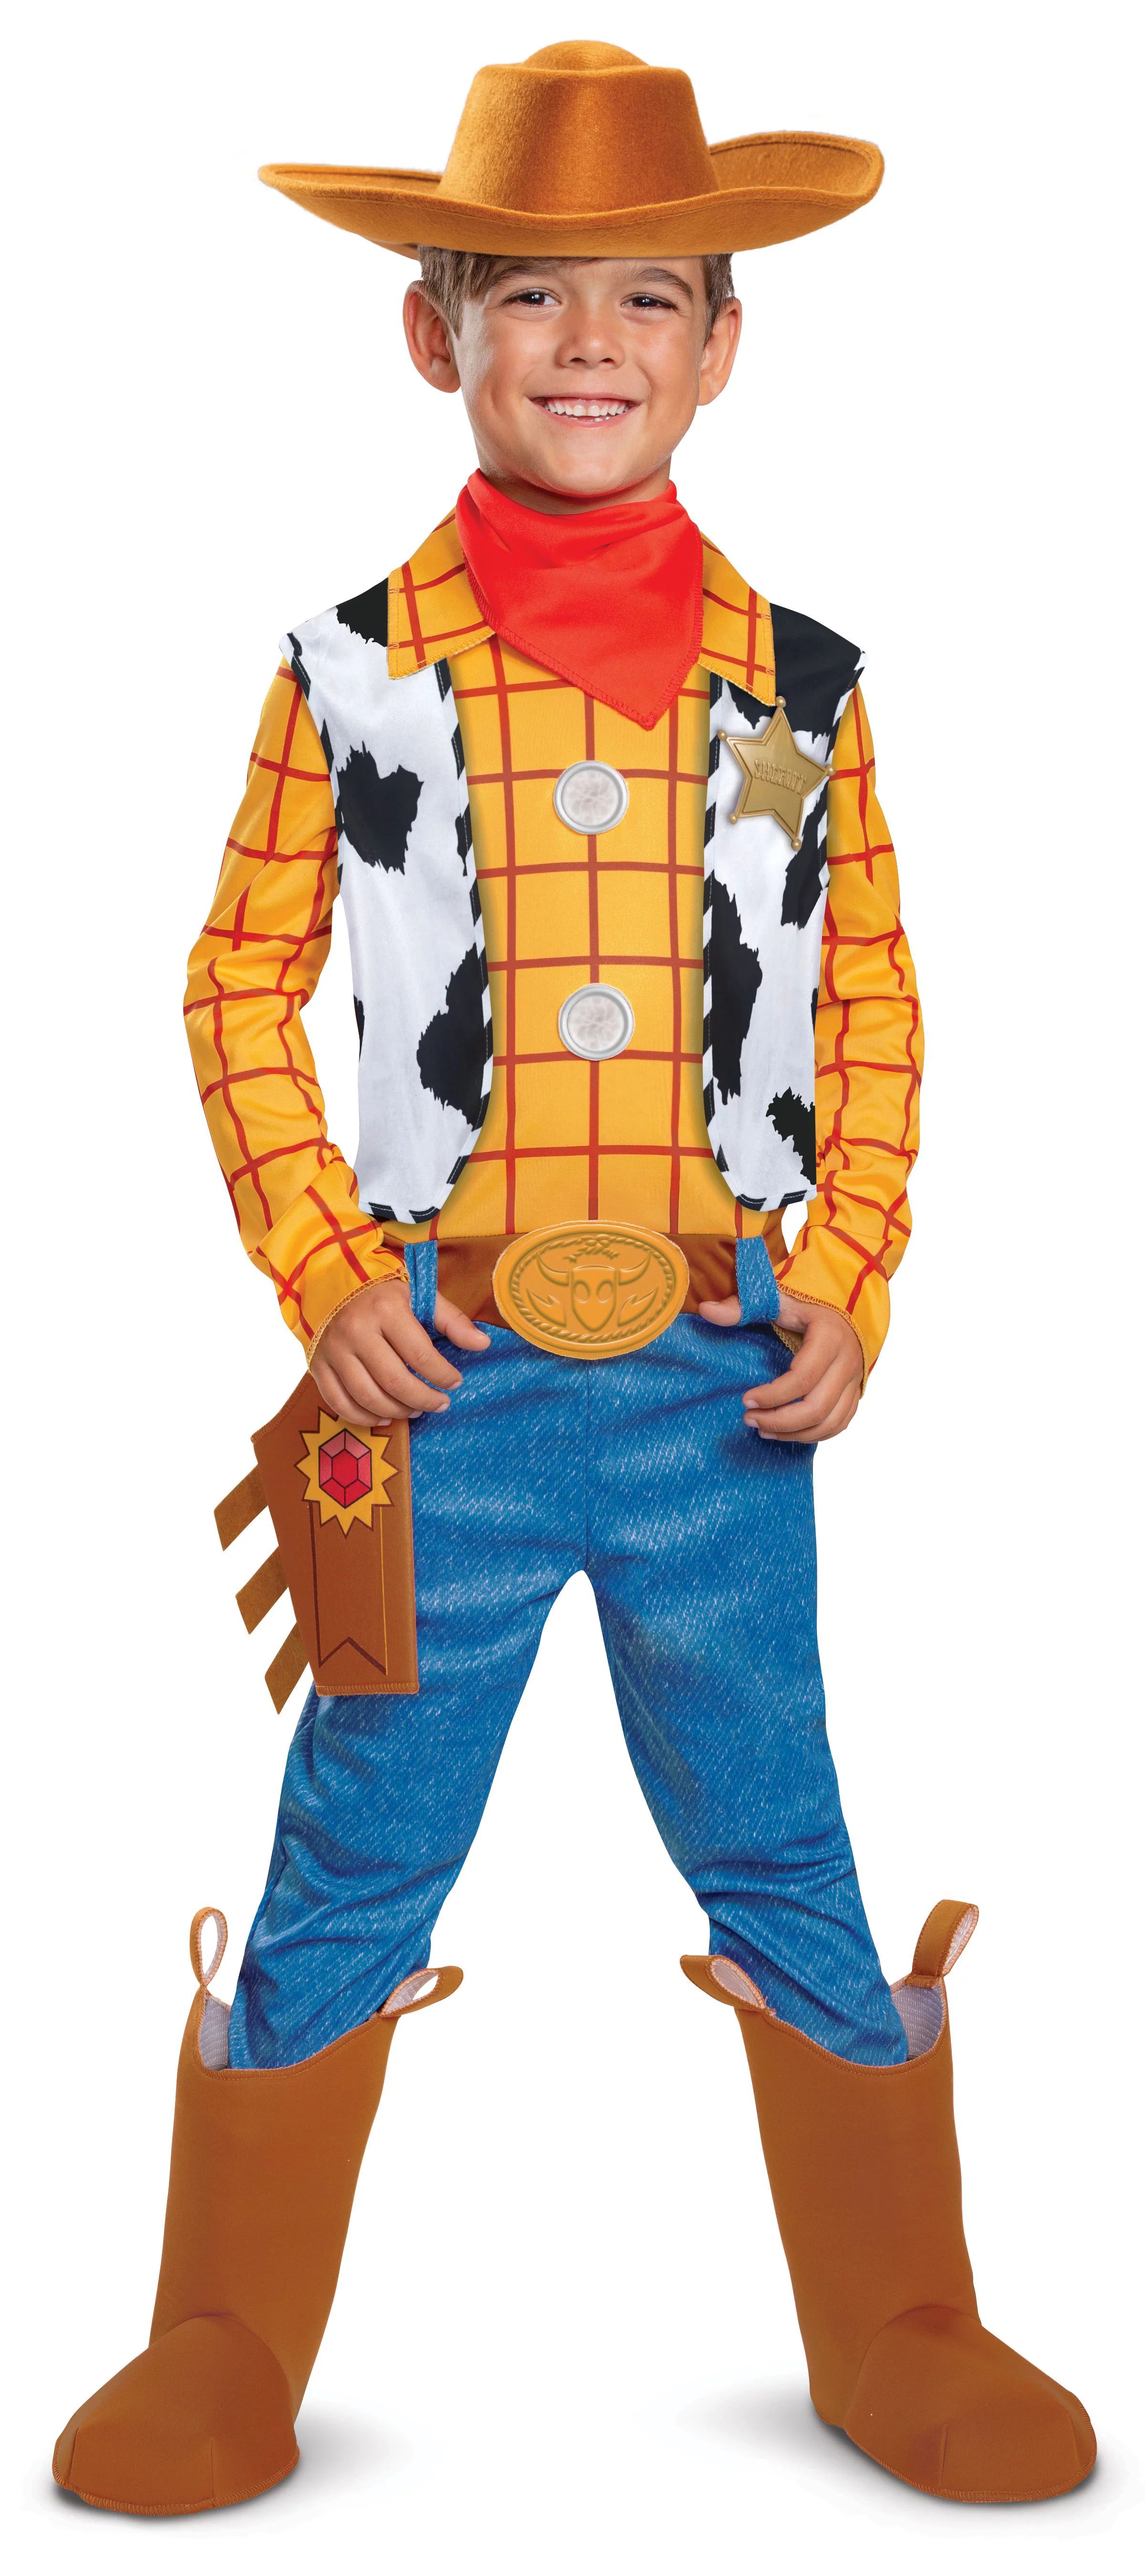 Disguise Toy Story Sheriff Classic Woody Boy's Halloween Fancy-Dress Costume for Child, 2T | Walmart (US)